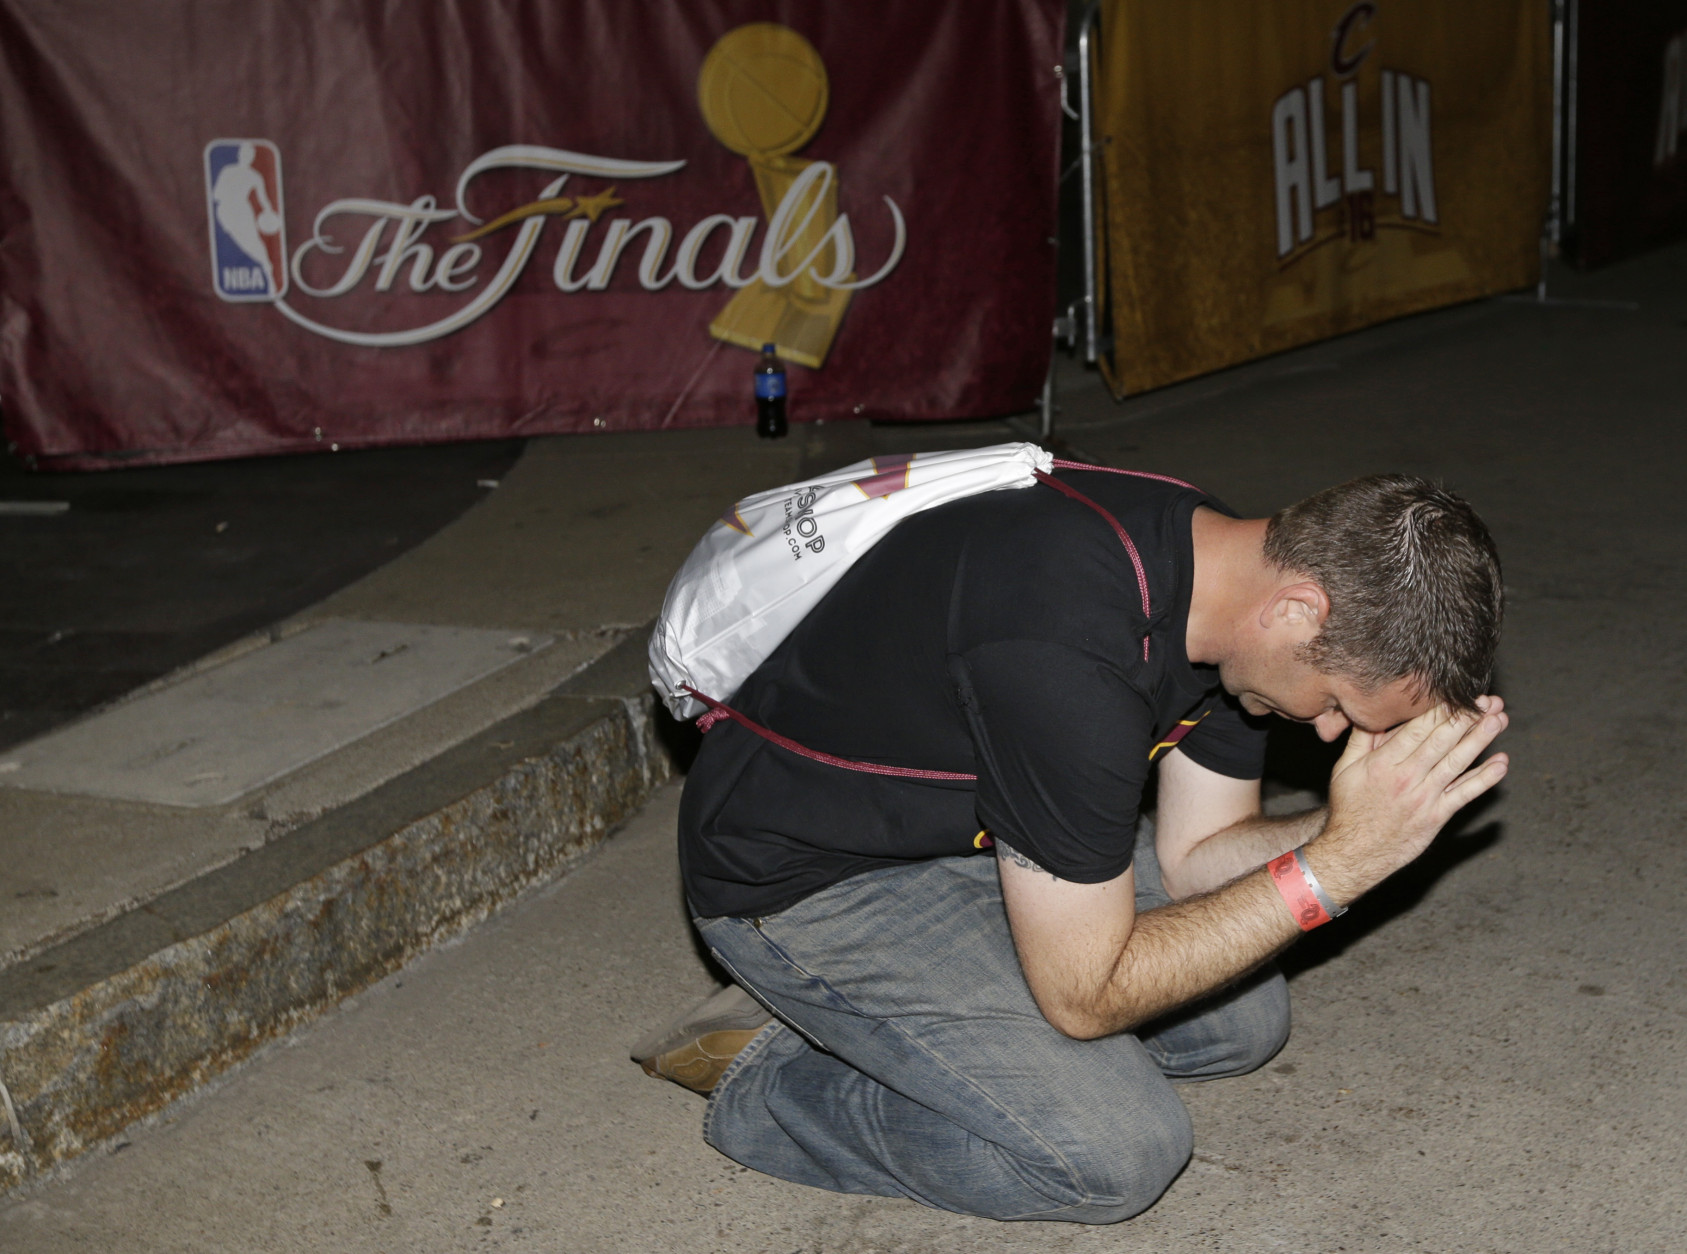 Brian Wilson prays in the final minutes of Game 7 of the NBA basketball Finals between the Cleveland Cavaliers and the Golden State Warriors, Sunday, June 19, 2016, in Cleveland. The Cavaliers won 93-89. (AP Photo/Tony Dejak)